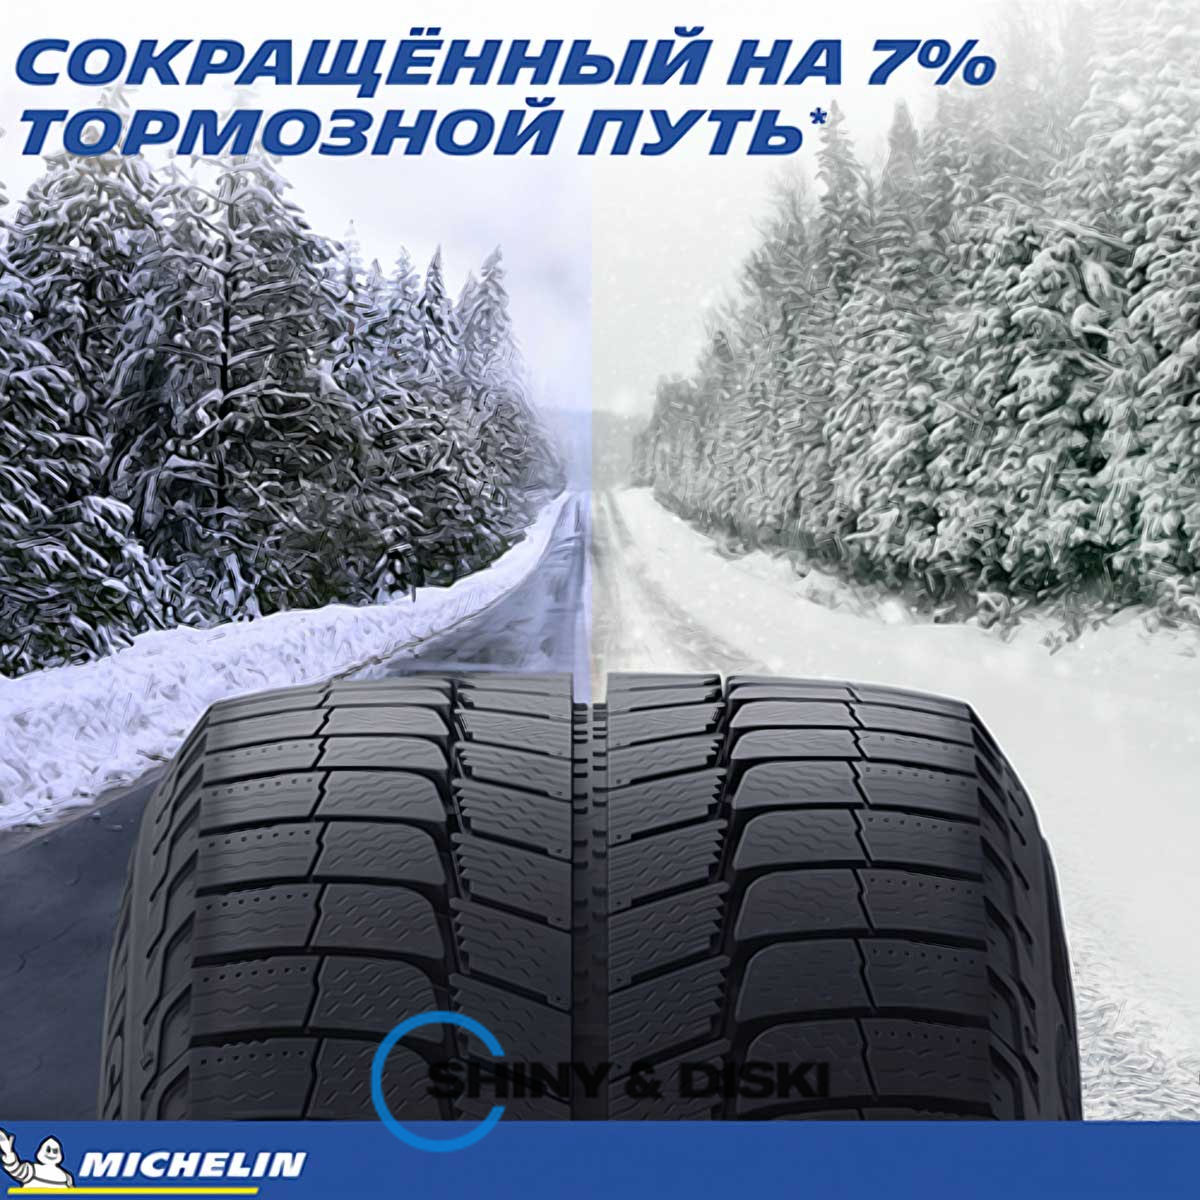 покрышки michelin x-ice xi3+ 225/60 r18 100h